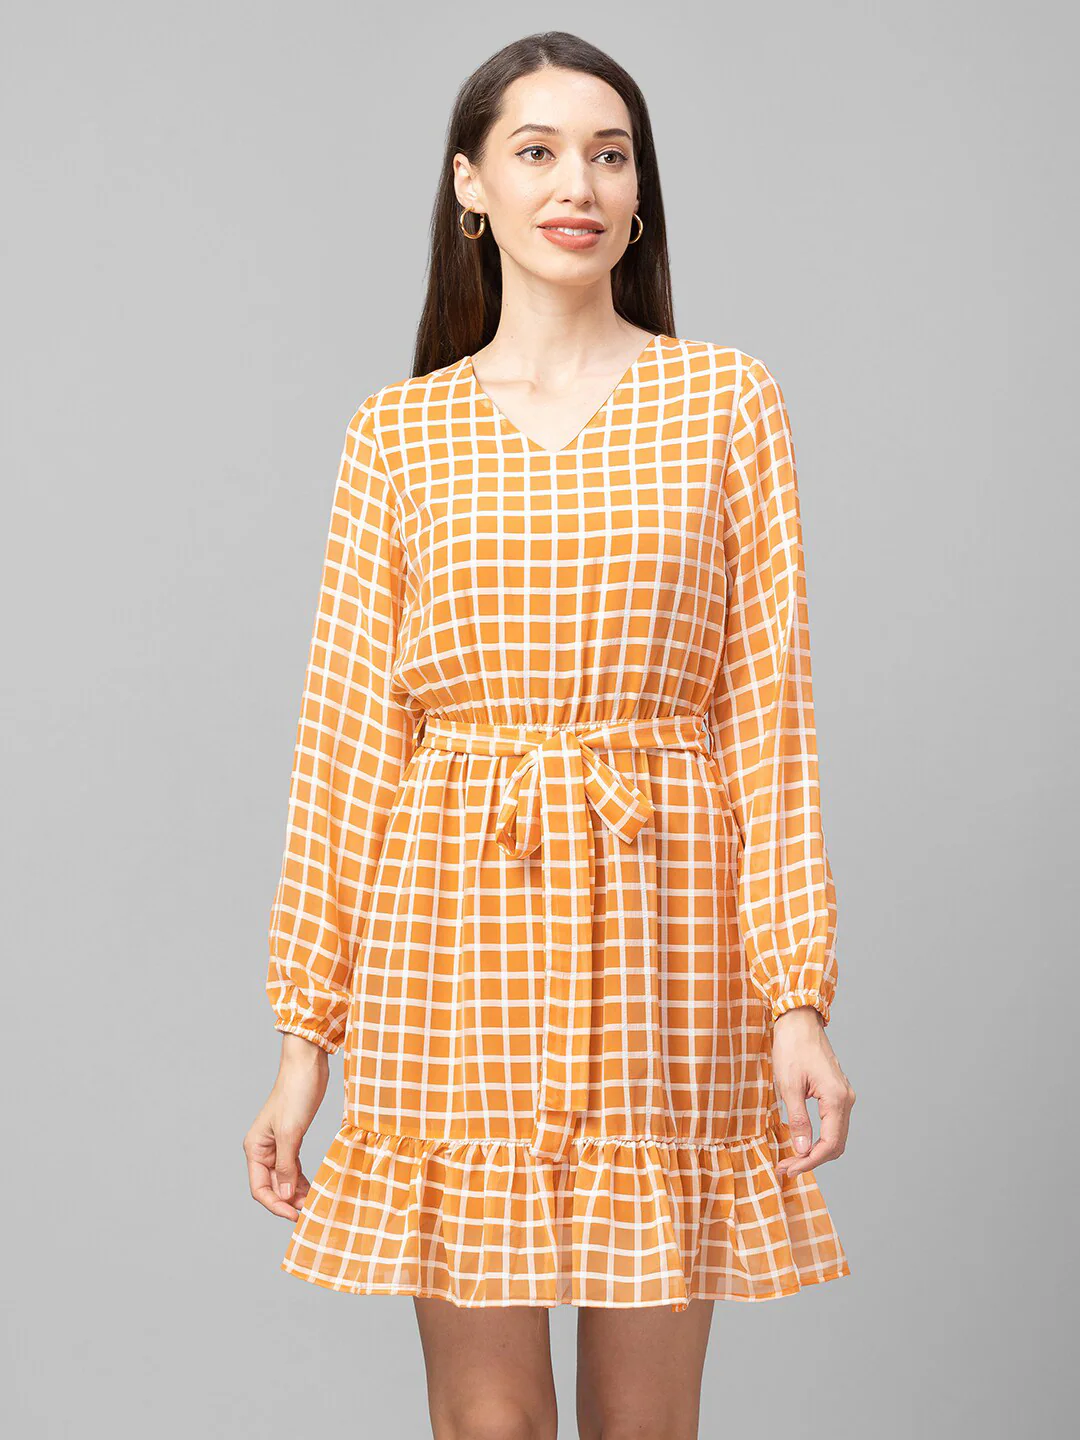 Globus Ochre Checked Fit and Flare Dress